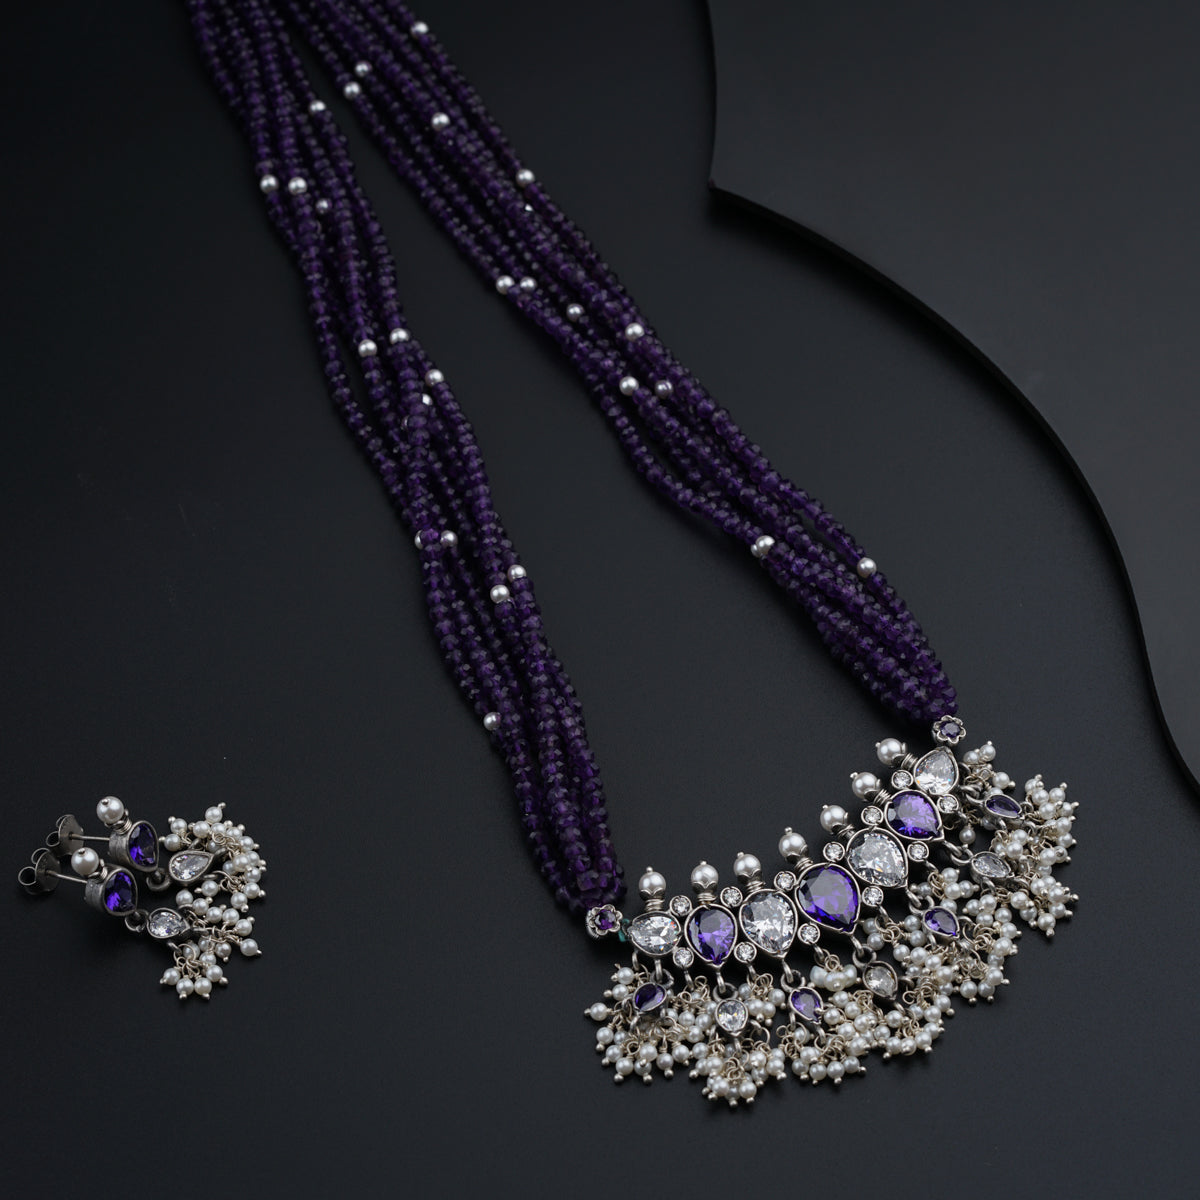 a necklace and earring with a purple bead